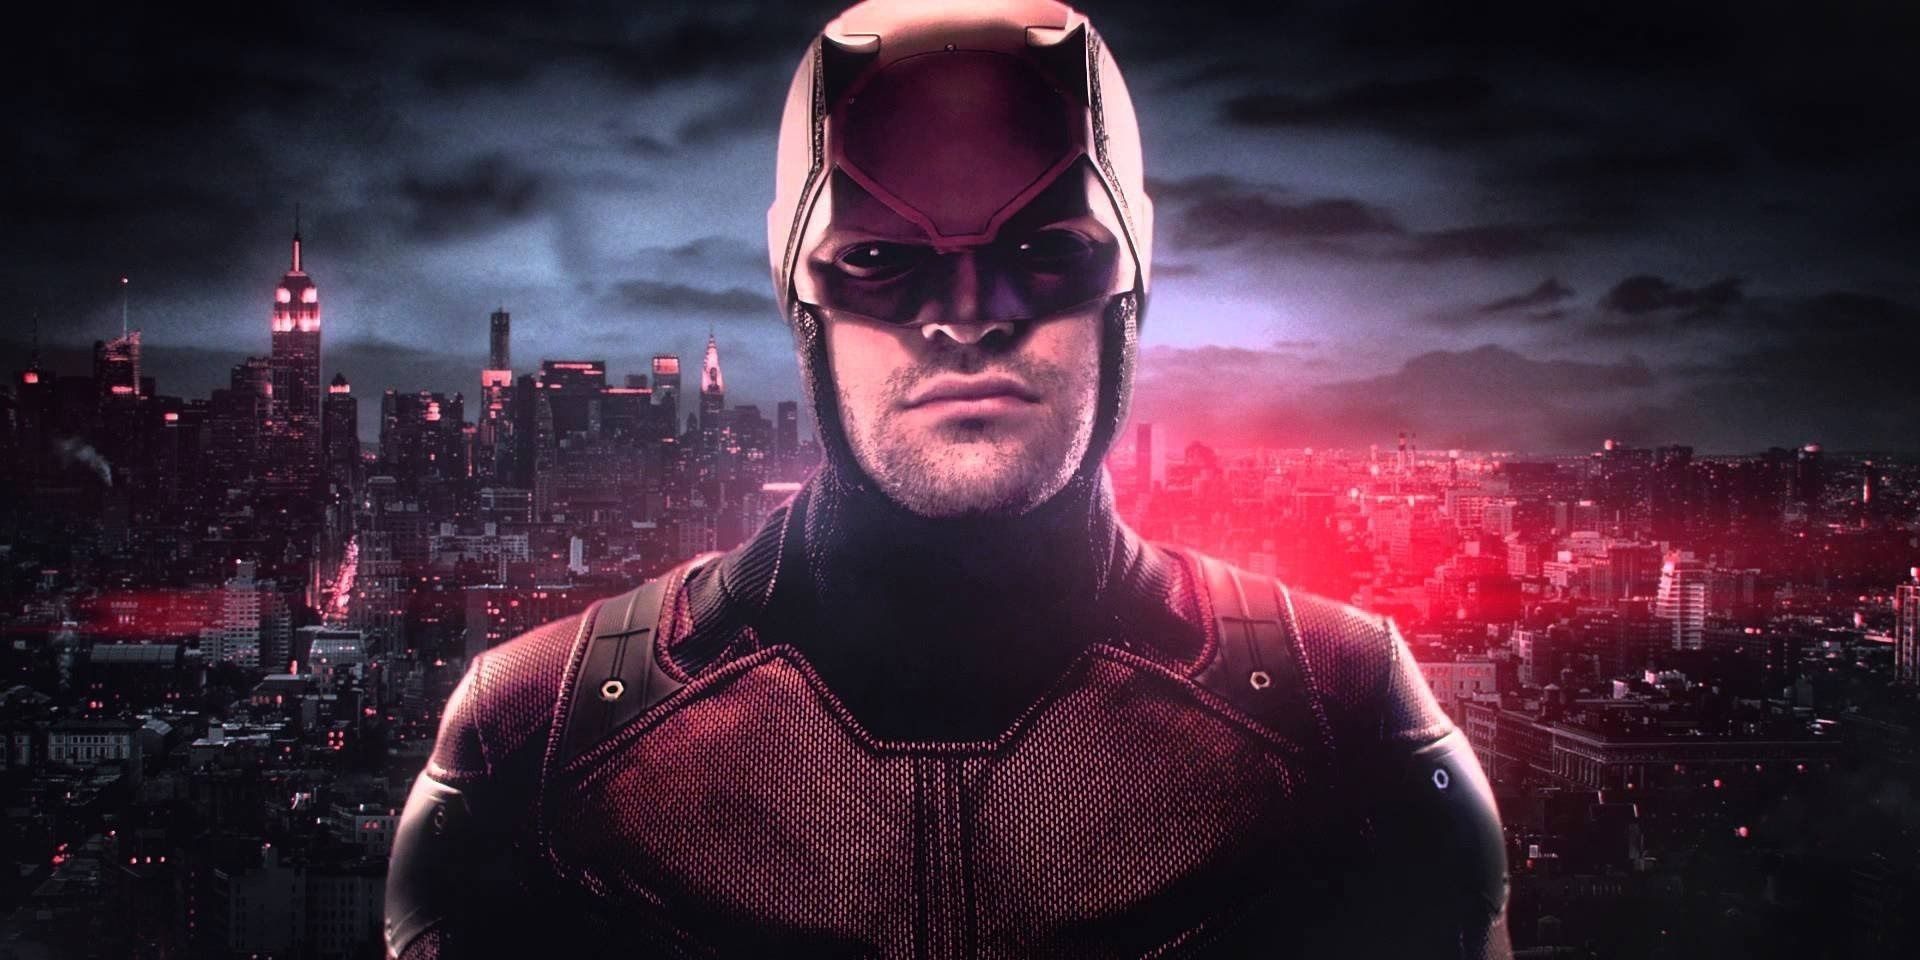 Charlie Cox as Daredevil in a promotional image for season 2